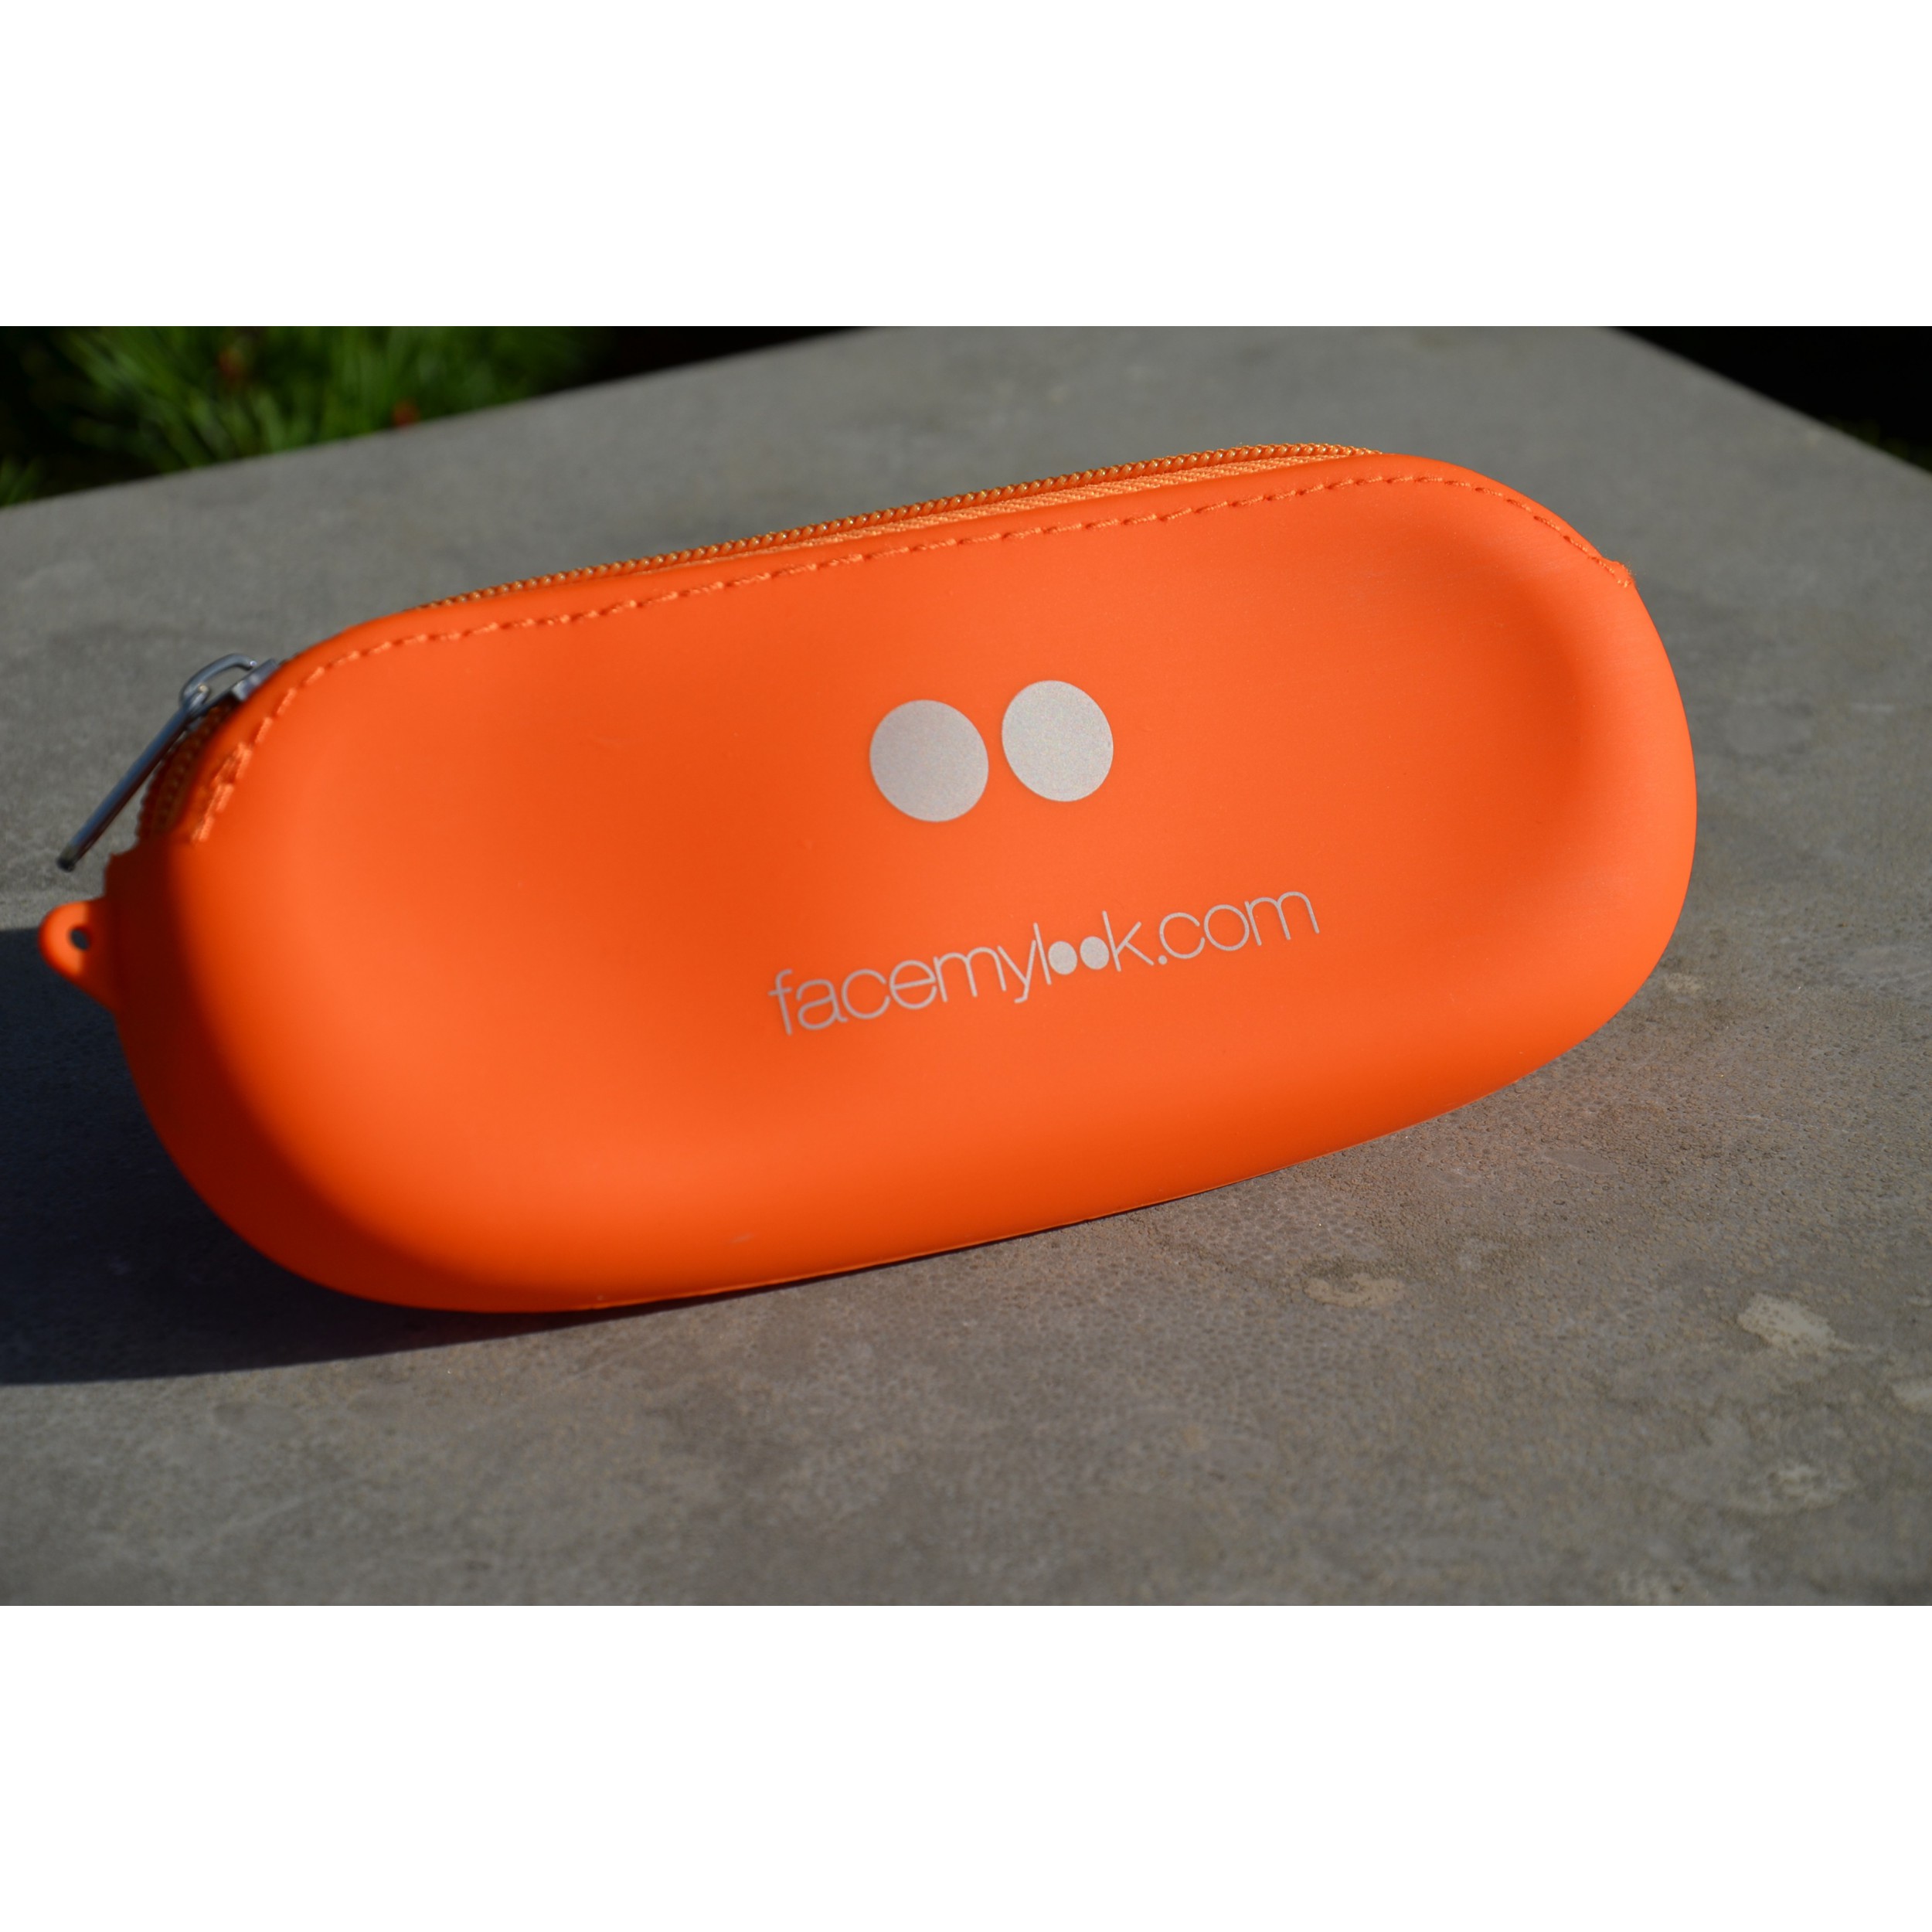 https://facemylook.com/231-zoom/holder-silicone-orange-category-accessories.jpg